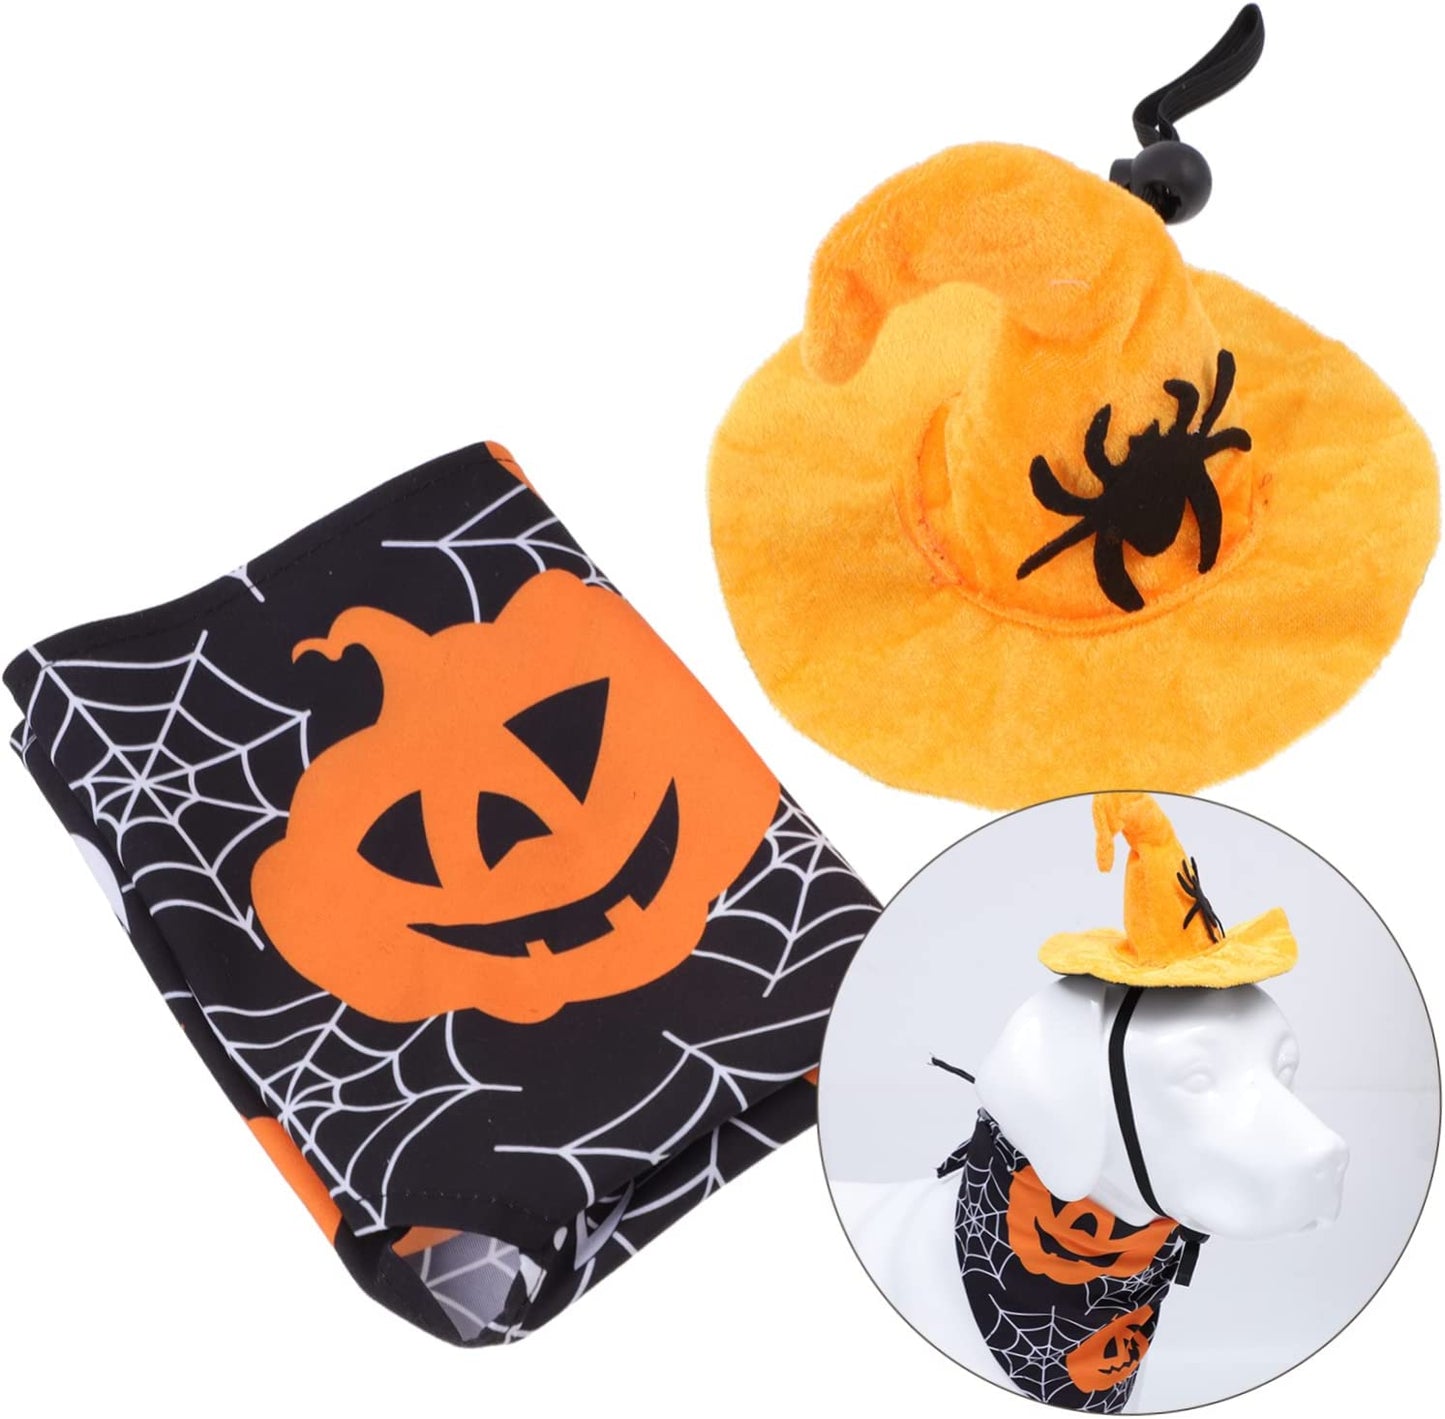 BCOATH 1 Set Large Medium Print Towel Adjustable Scarf Halloween Pet Decoration Scary Pets and Puppy Ornament Party Kit for Cats Witch Cat Bib Bandana Funny Triangle with Hat Dog Pumpkin Animals & Pet Supplies > Pet Supplies > Dog Supplies > Dog Apparel BCOATH   